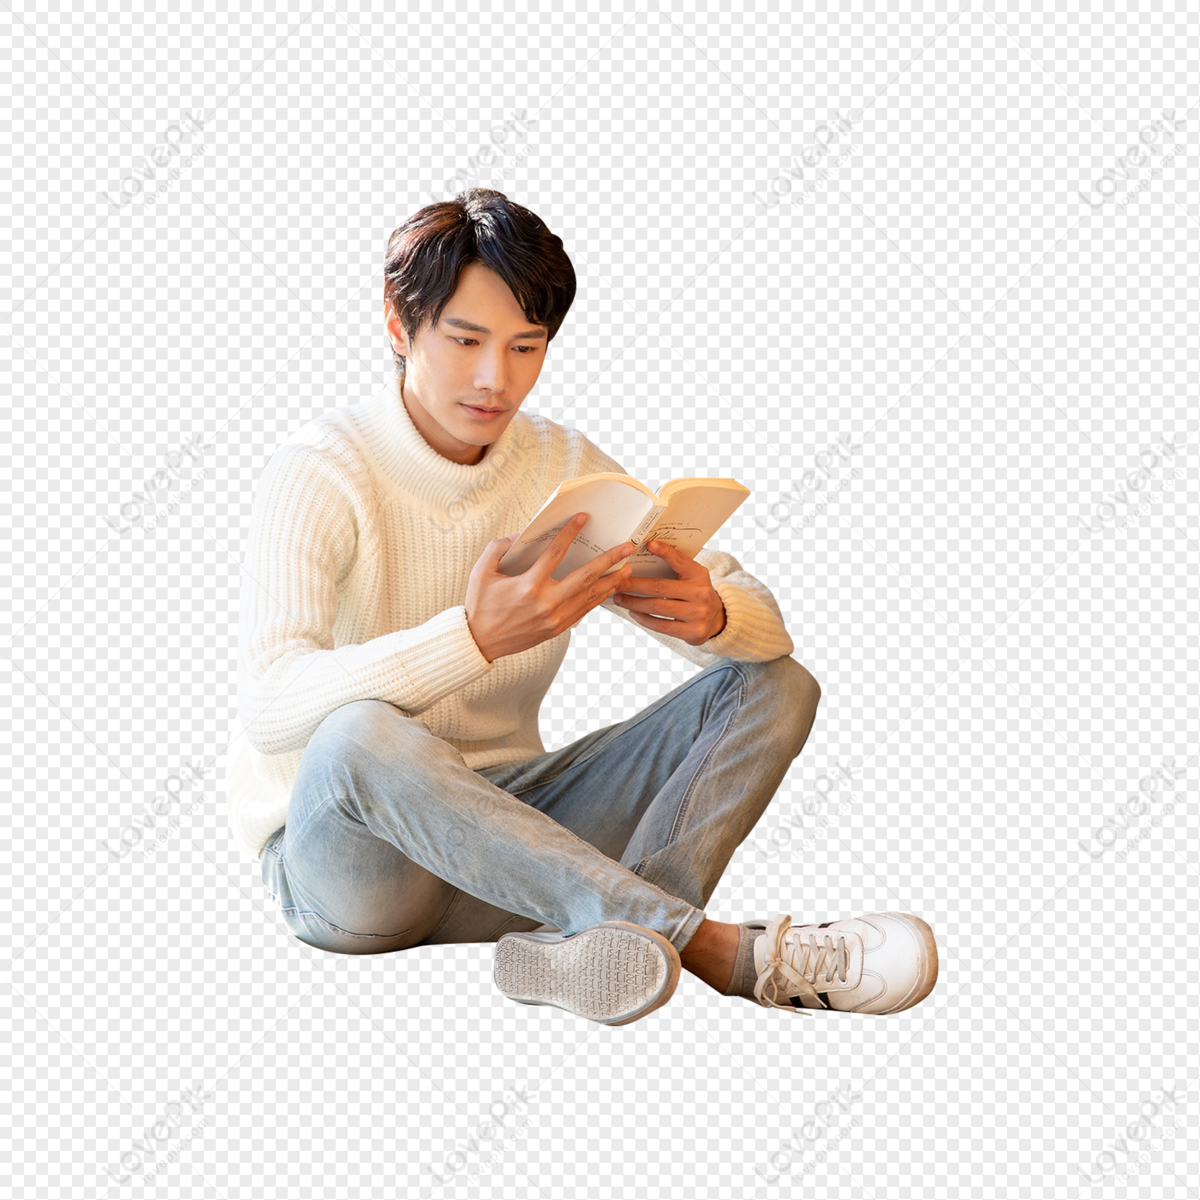 Male Sitting On The Floor Reading A Book PNG Transparent Background And  Clipart Image For Free Download - Lovepik | 401668860